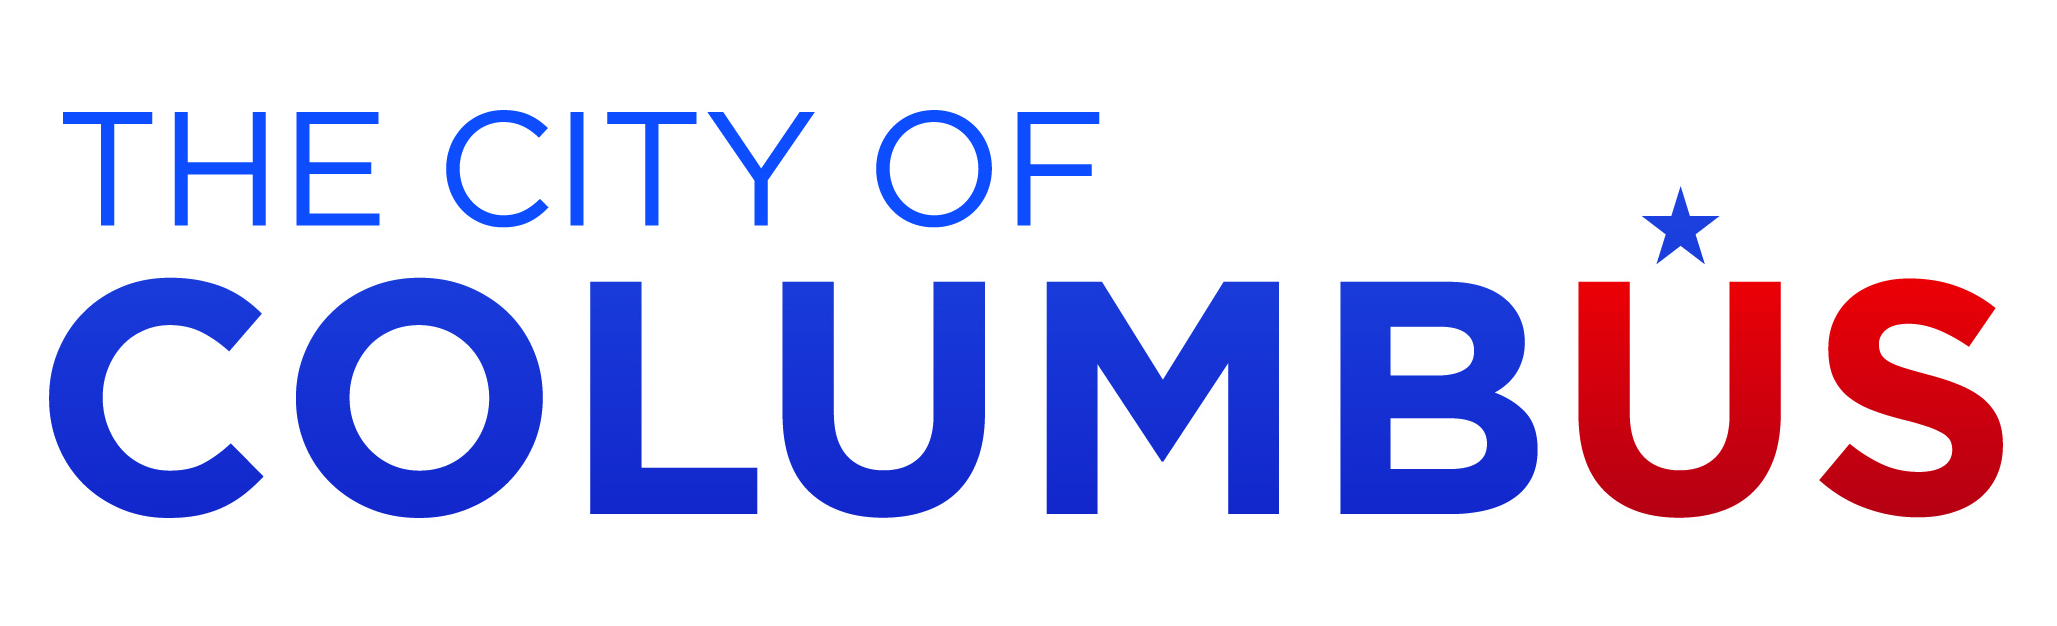 City of Columbus Logo- Find your trash schedule

